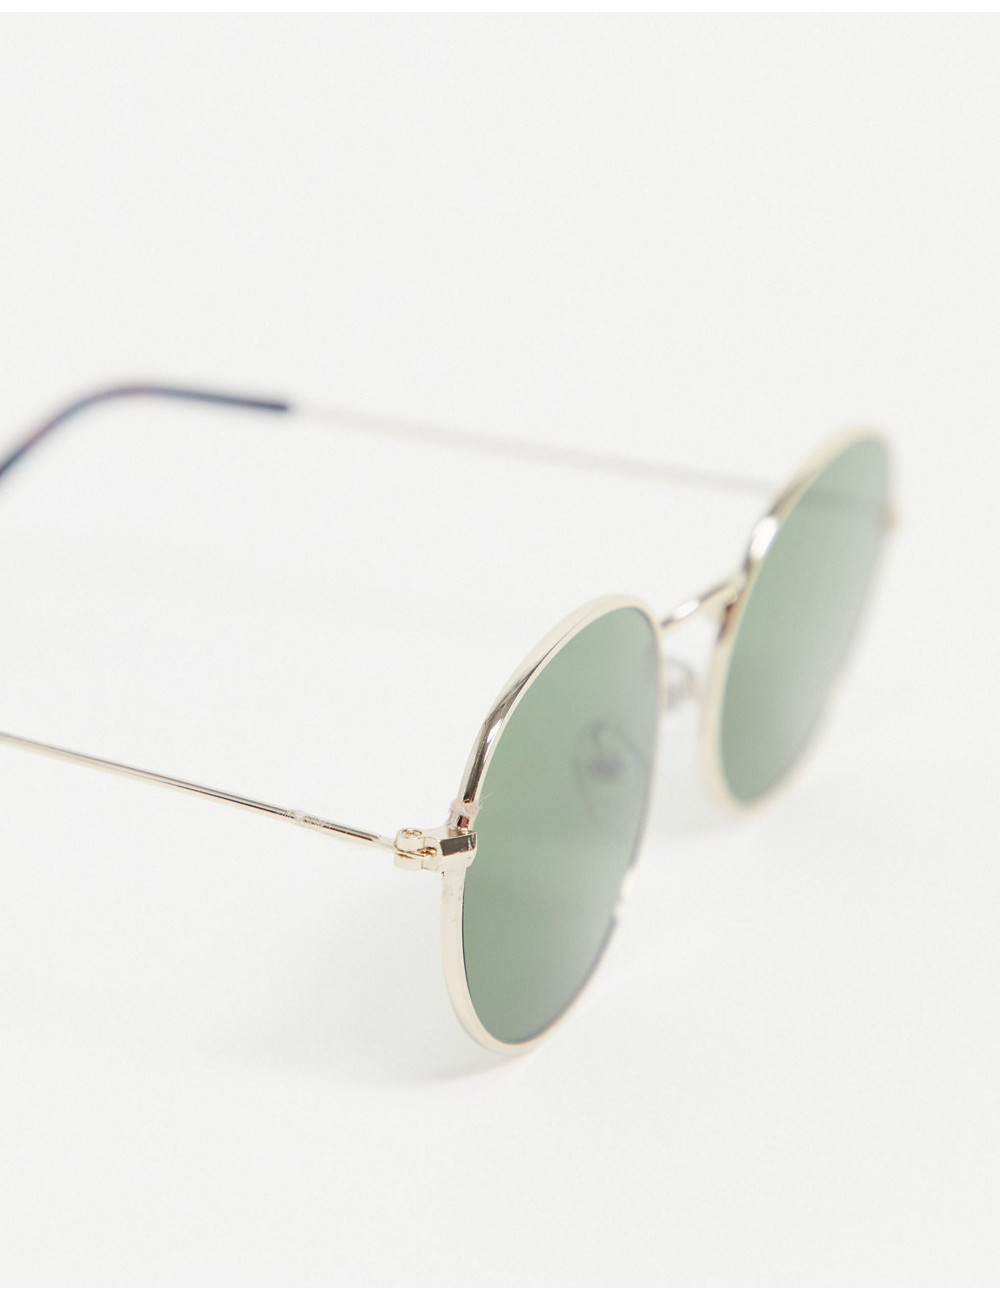 New Look oval sunglasses in...